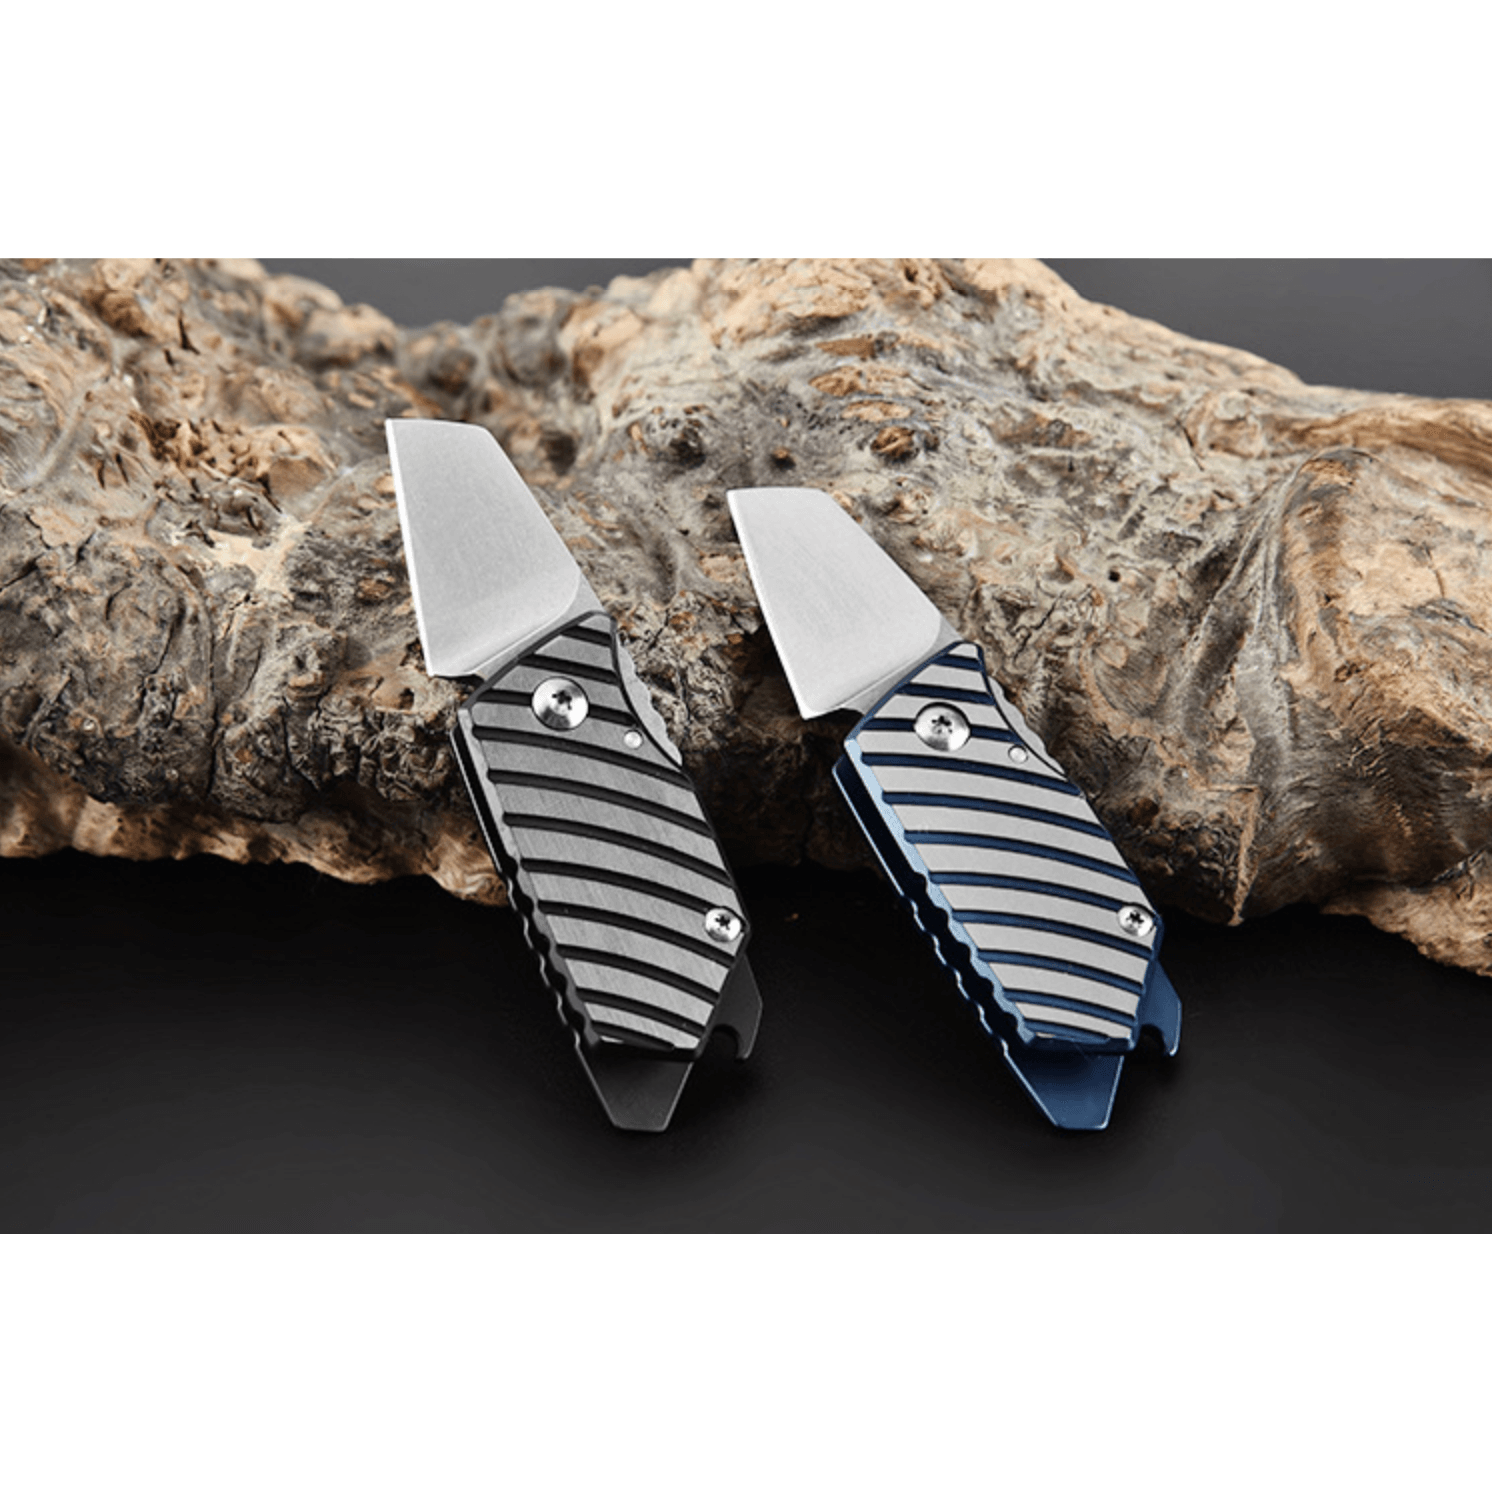 Mini Knife D2 Stainless Steel with Bottle Opener - Silipac